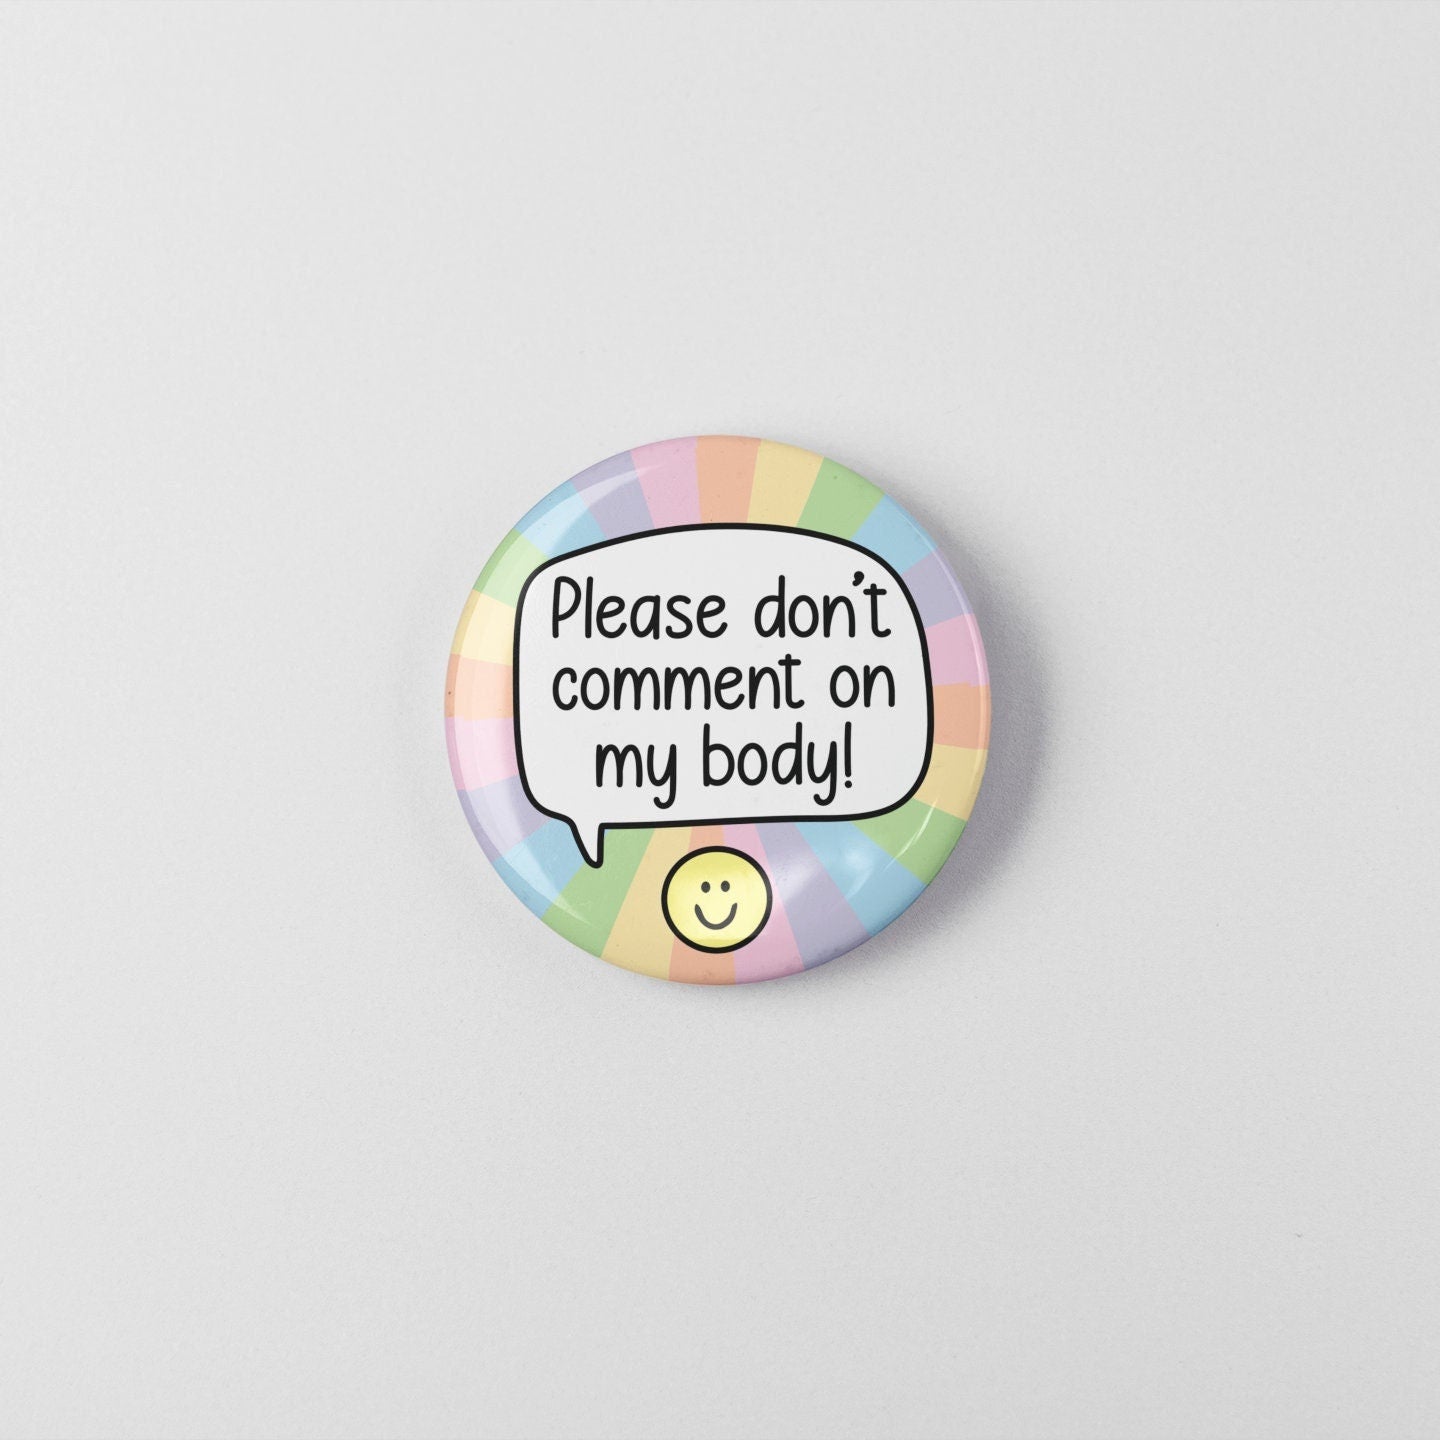 Please Don't Comment On My Body - Badge Pin